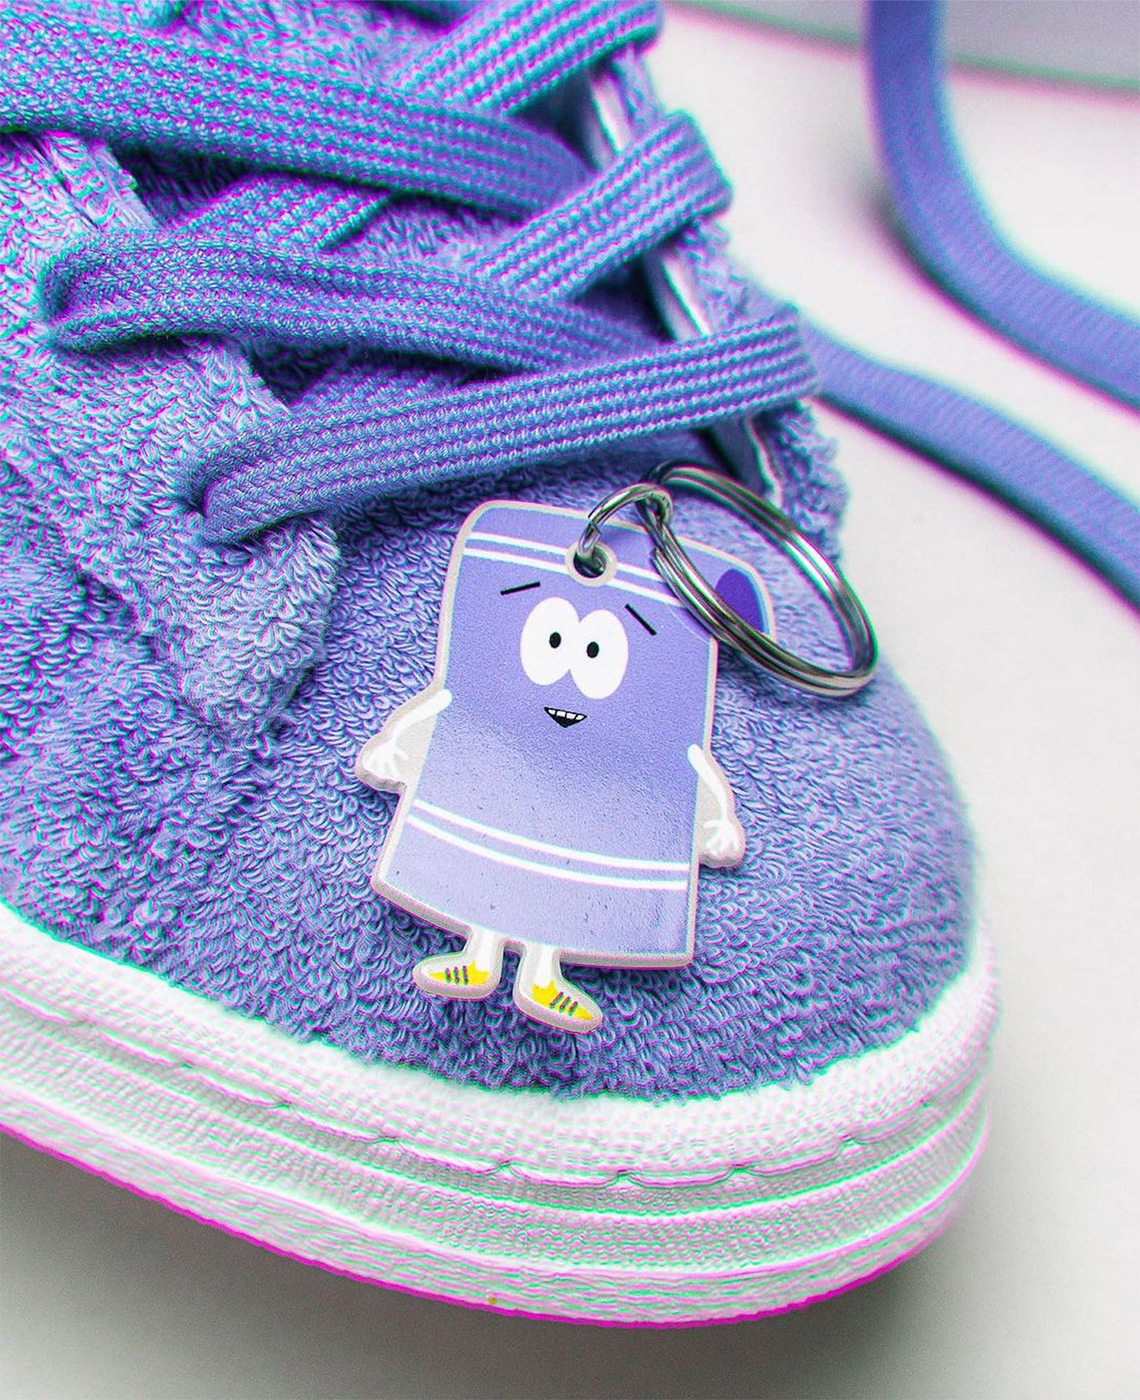 Towelie Adidas South Park Shoes Release Date 2